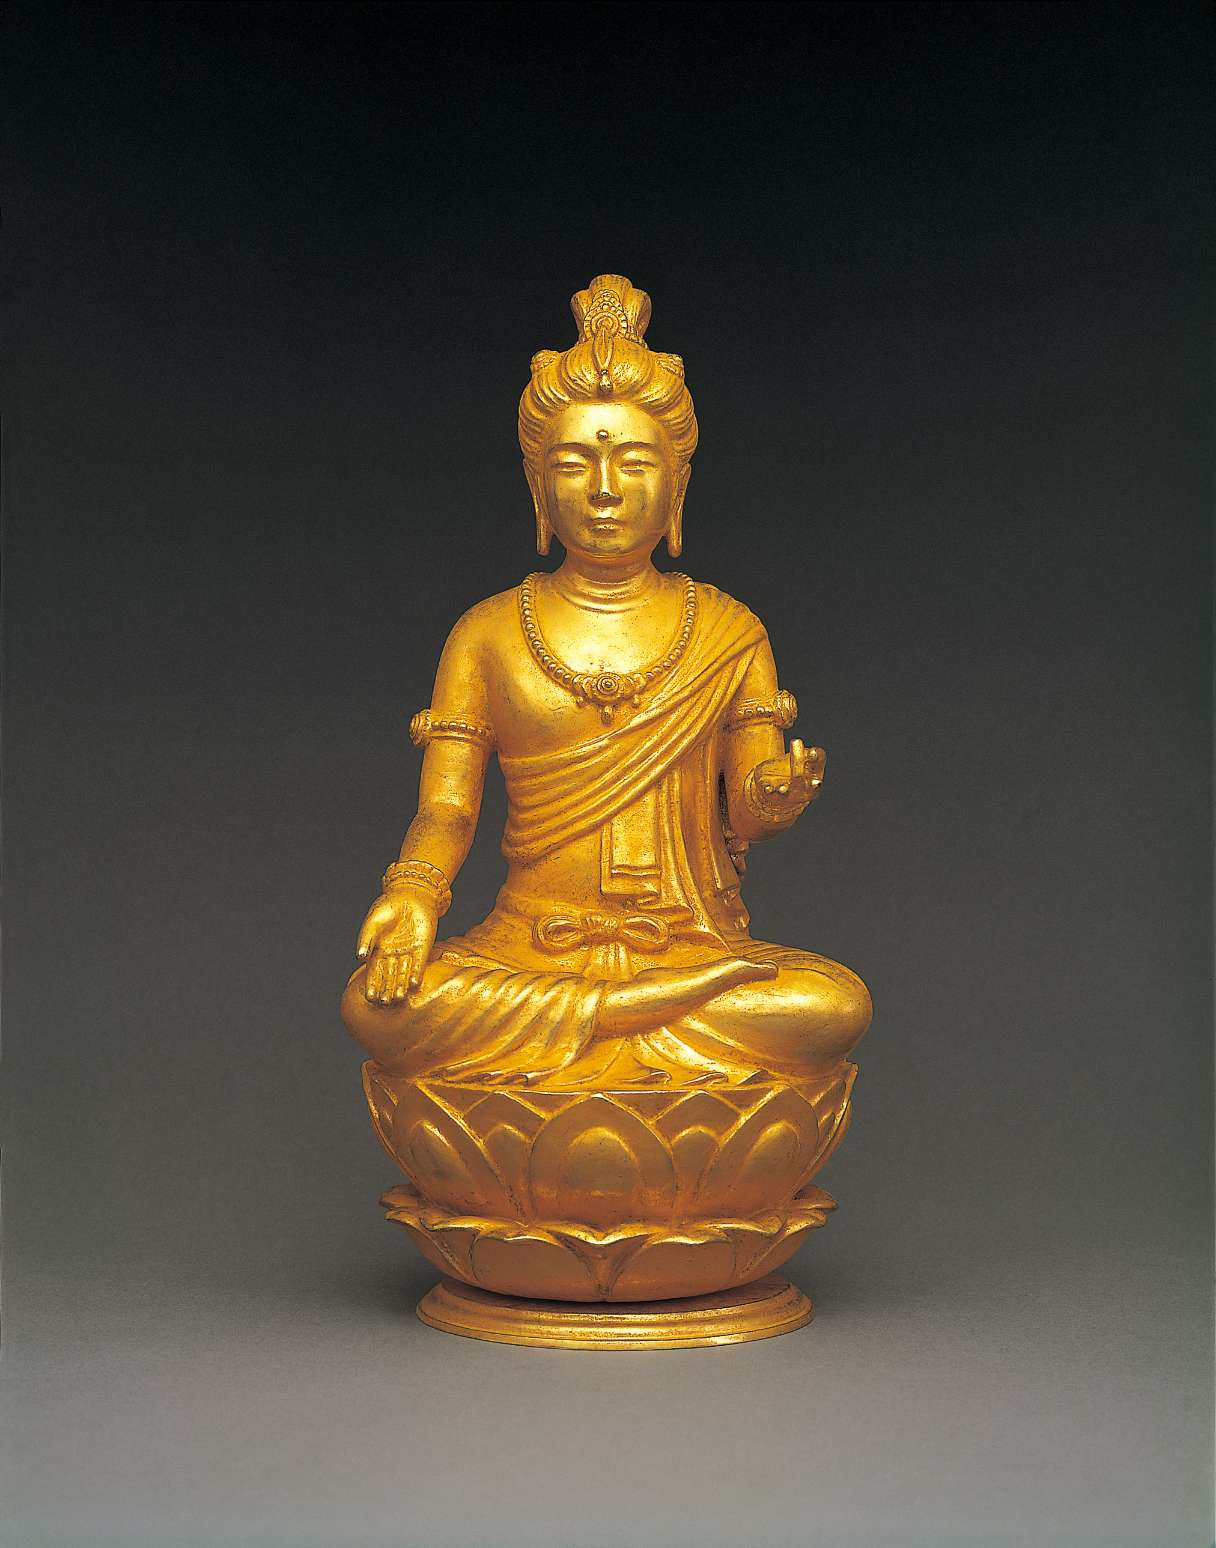 A golden hued statue of a bodhisattva in royal robes and jewelry, hair in topknot, sitting cross-legged atop a lotus seat, right hand resting palm upturned on right knee, left hand raised, upturned.